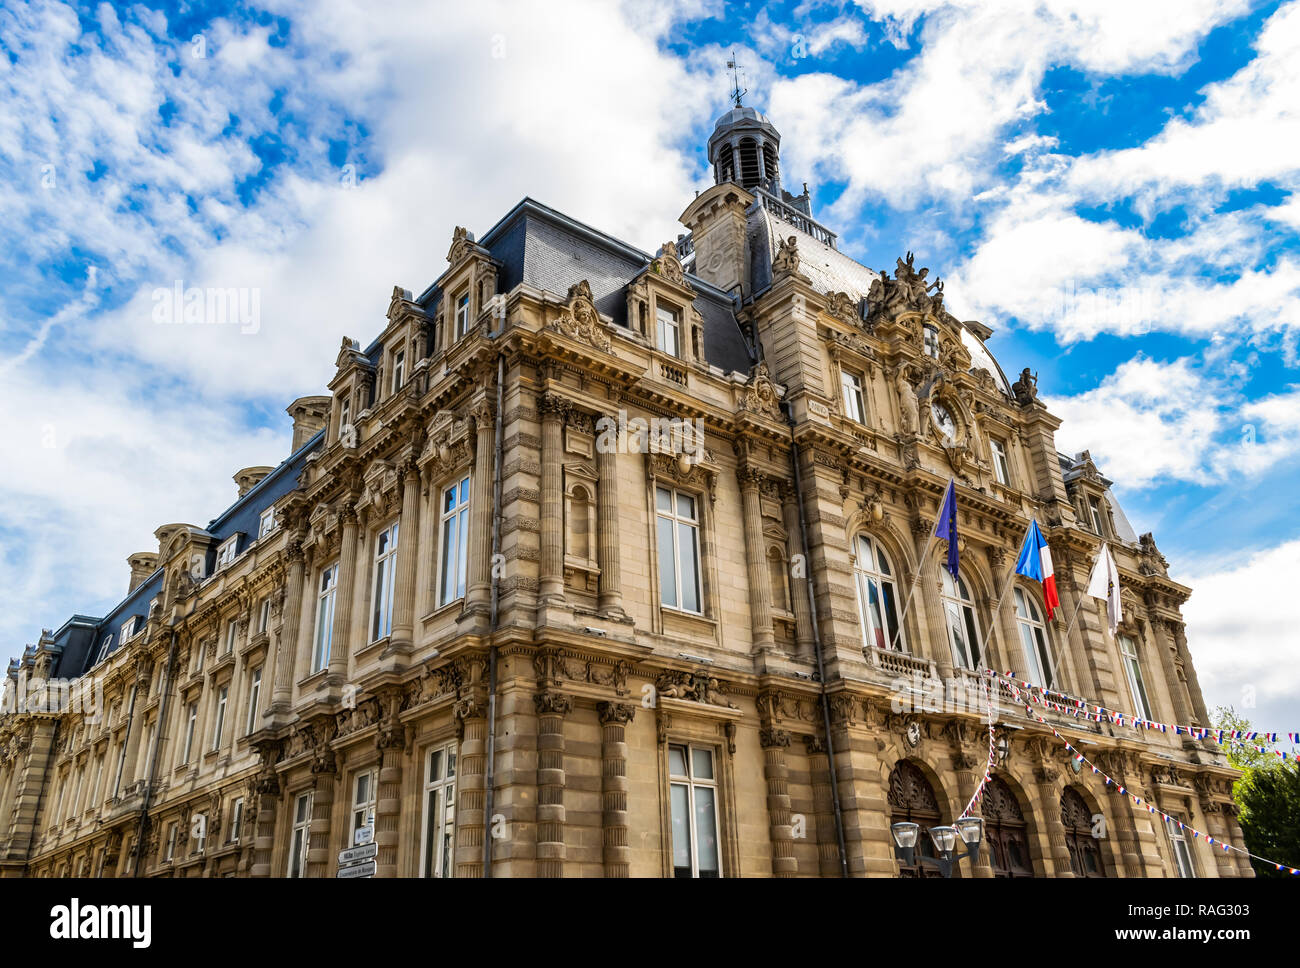 Tourcoing,France-May 1,2017: Town hall,Hotel de Ville,Mairie of Tourcoing.Tourcoing is one of the largest cities located near Lille.Department Nord. Stock Photo